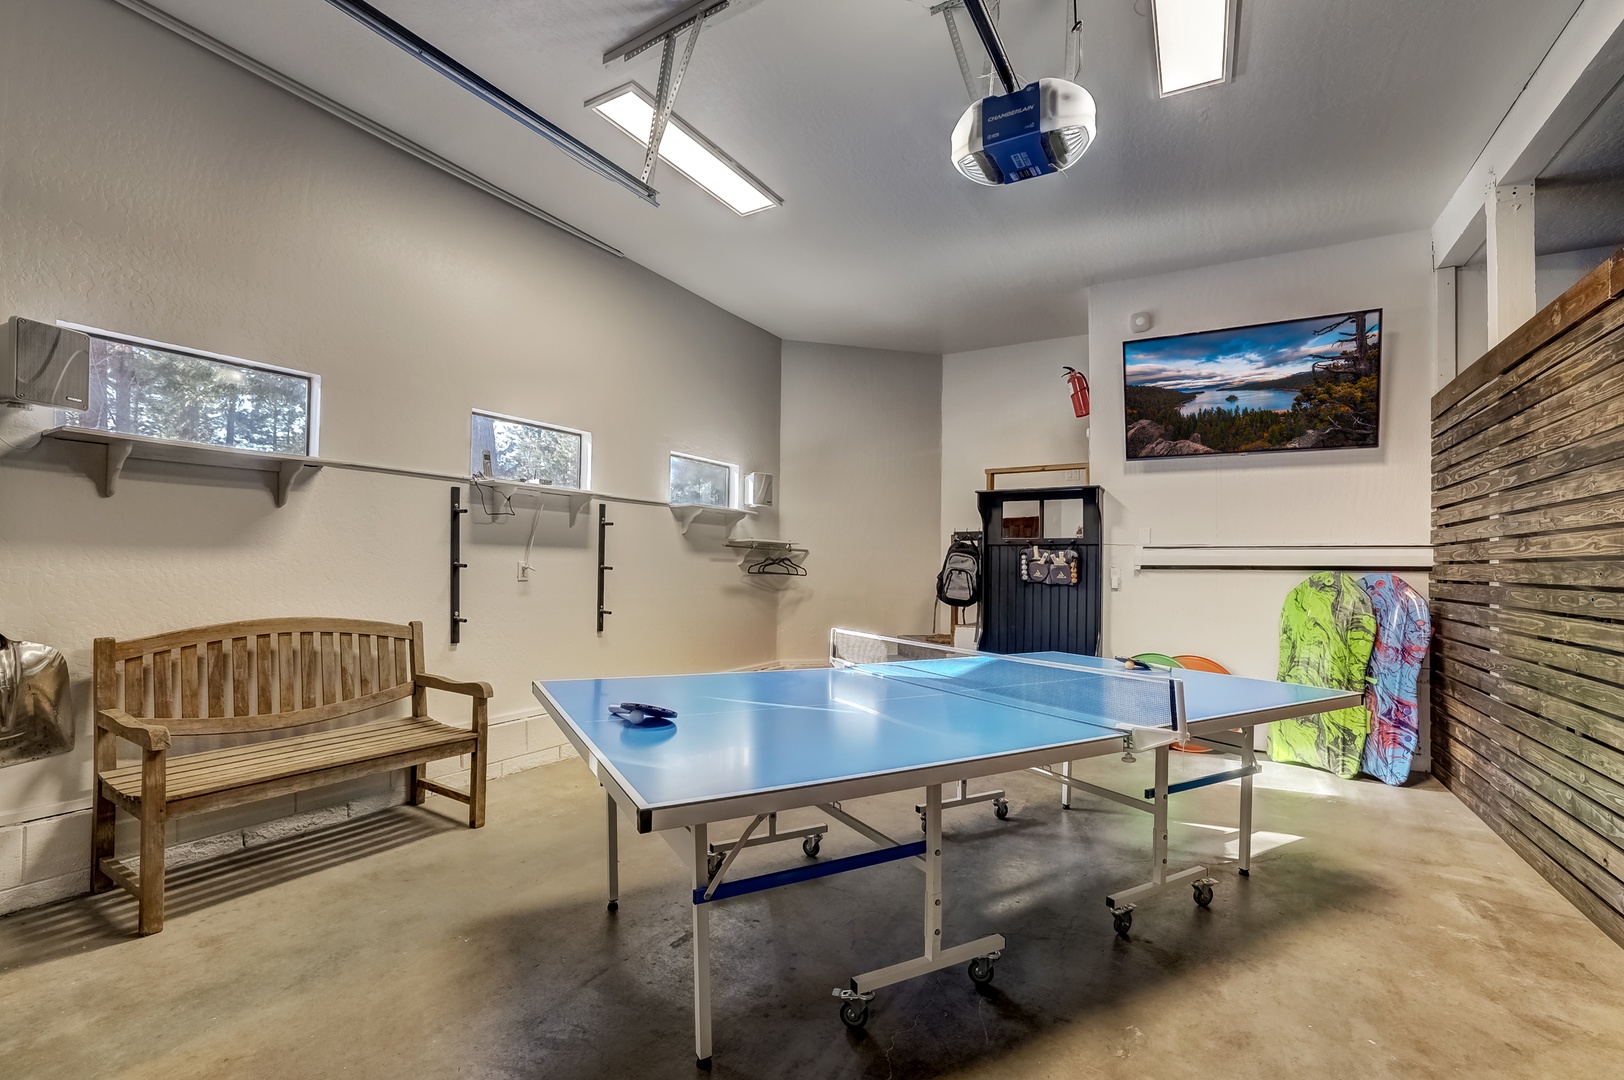 Garage ping pong table - heated!